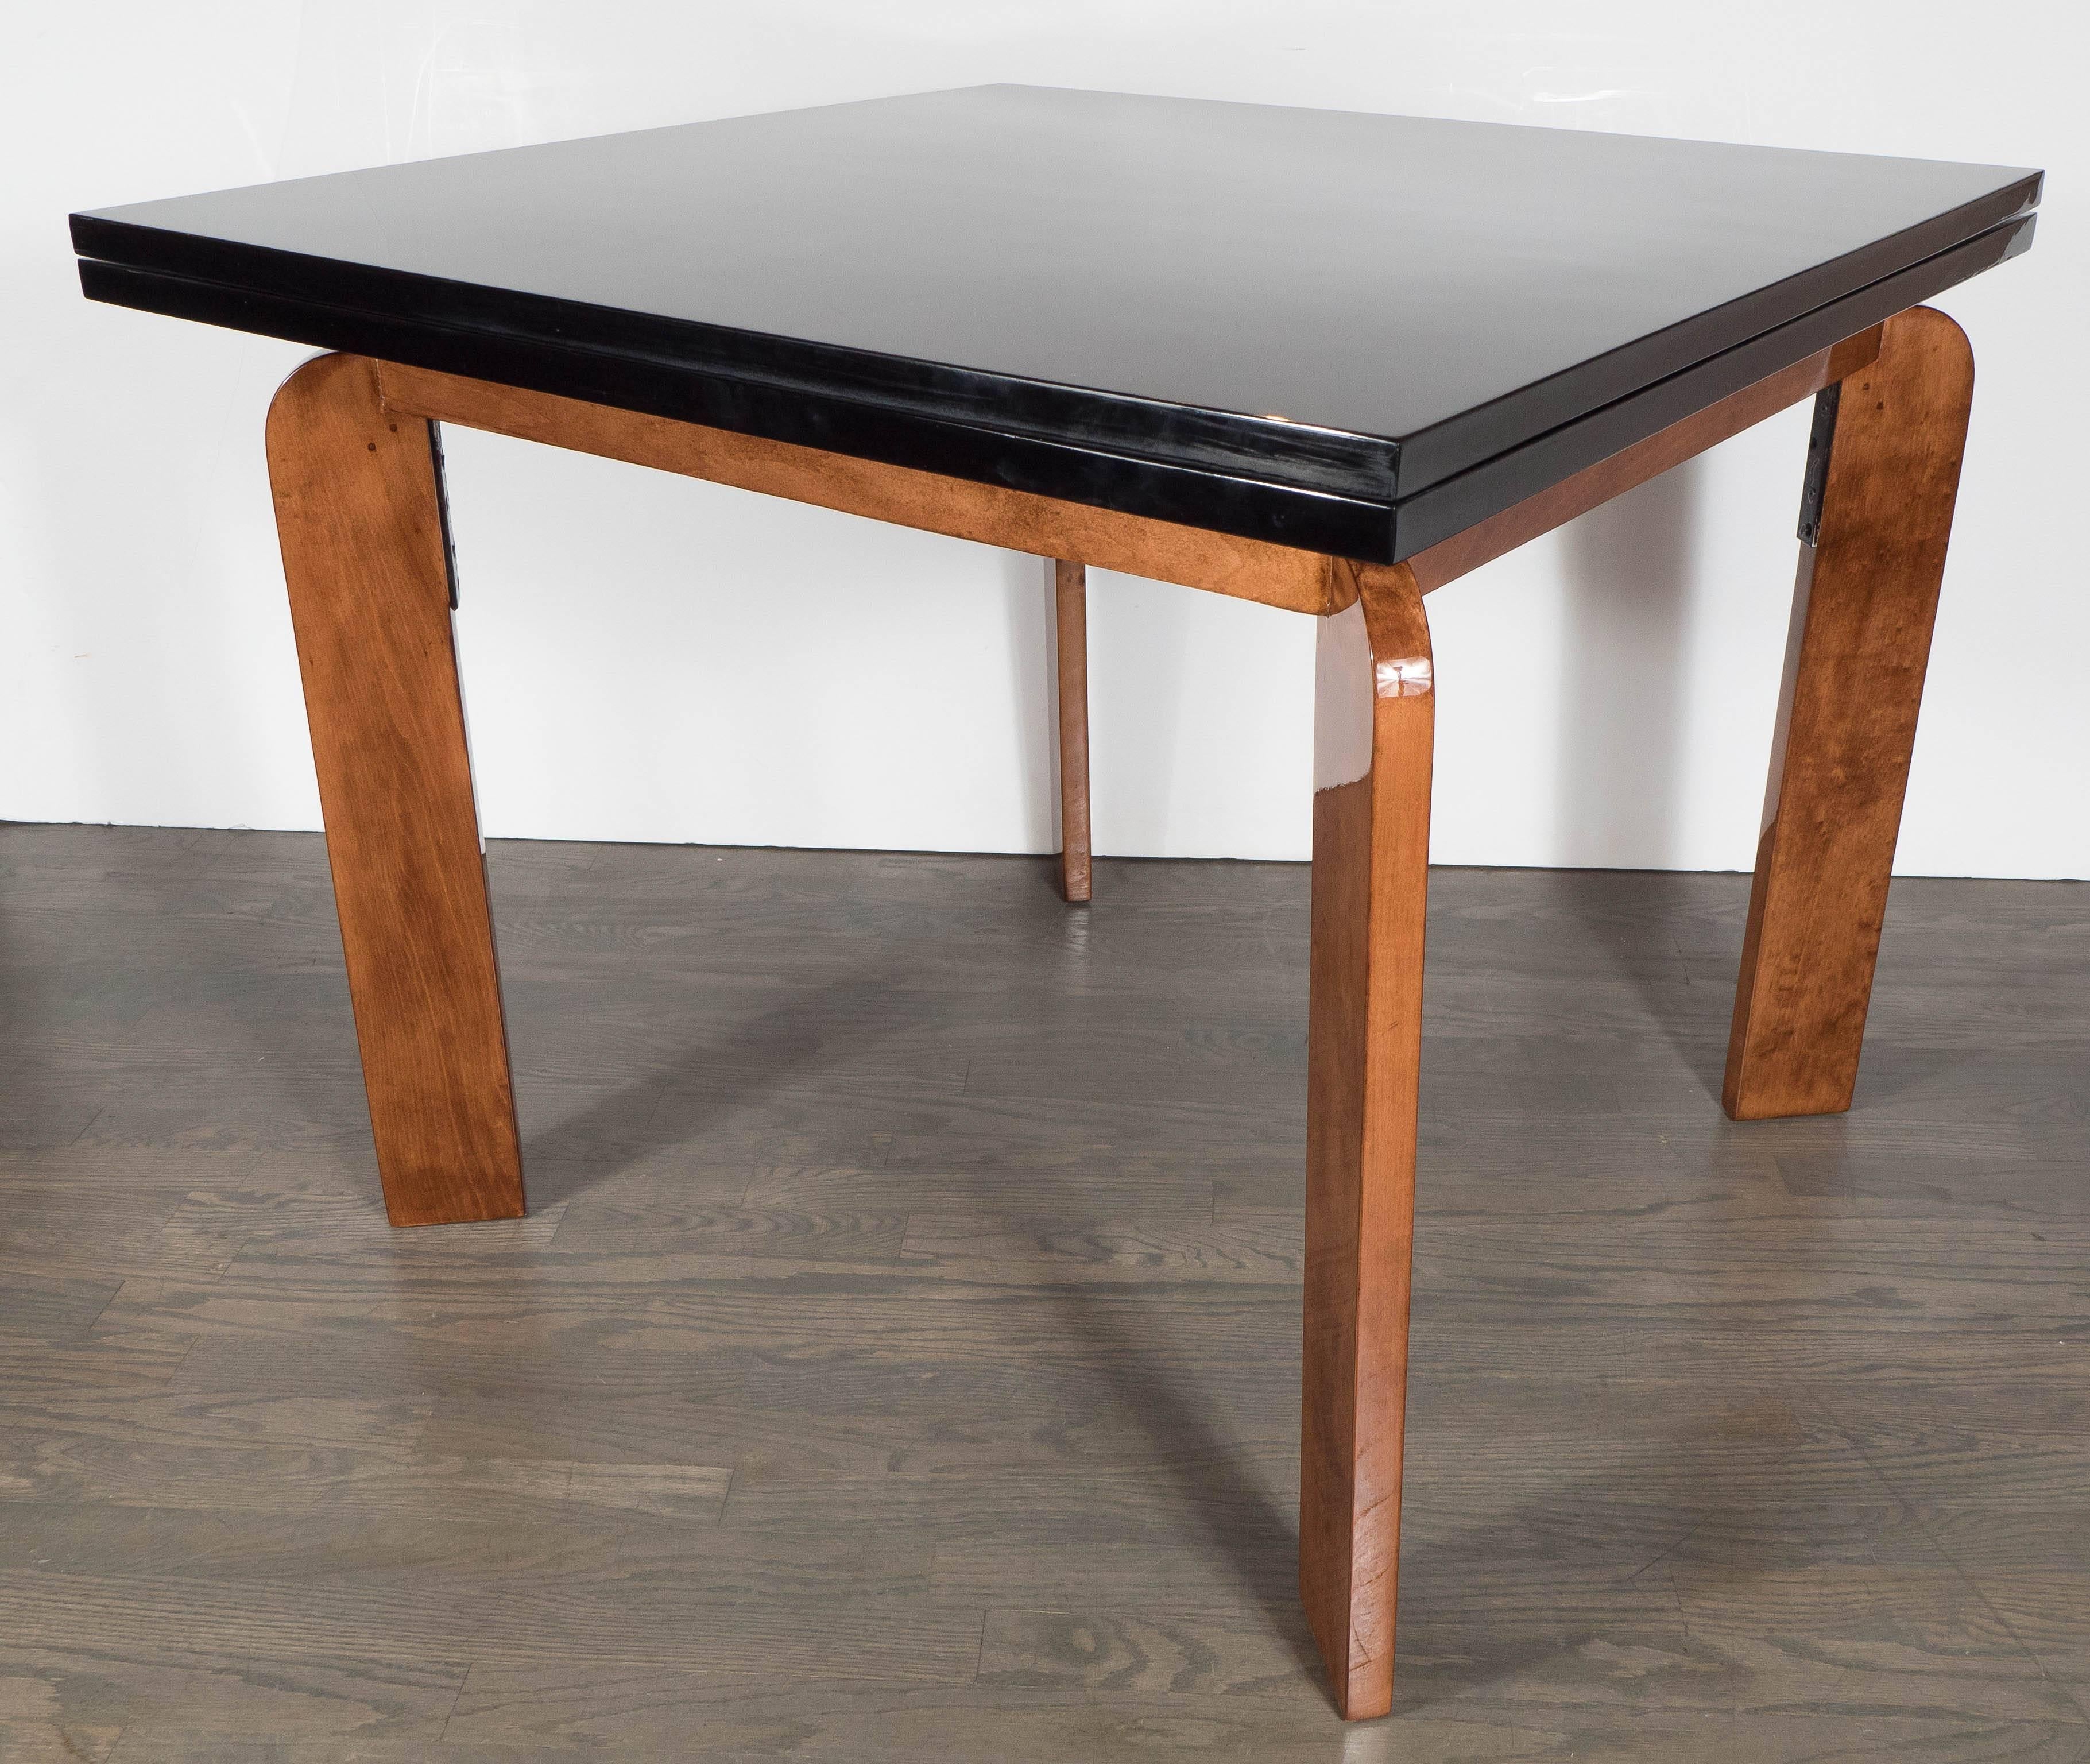 American  Streamline Art Deco Flip-Top Extension Dining Table or Game Table by Modernage